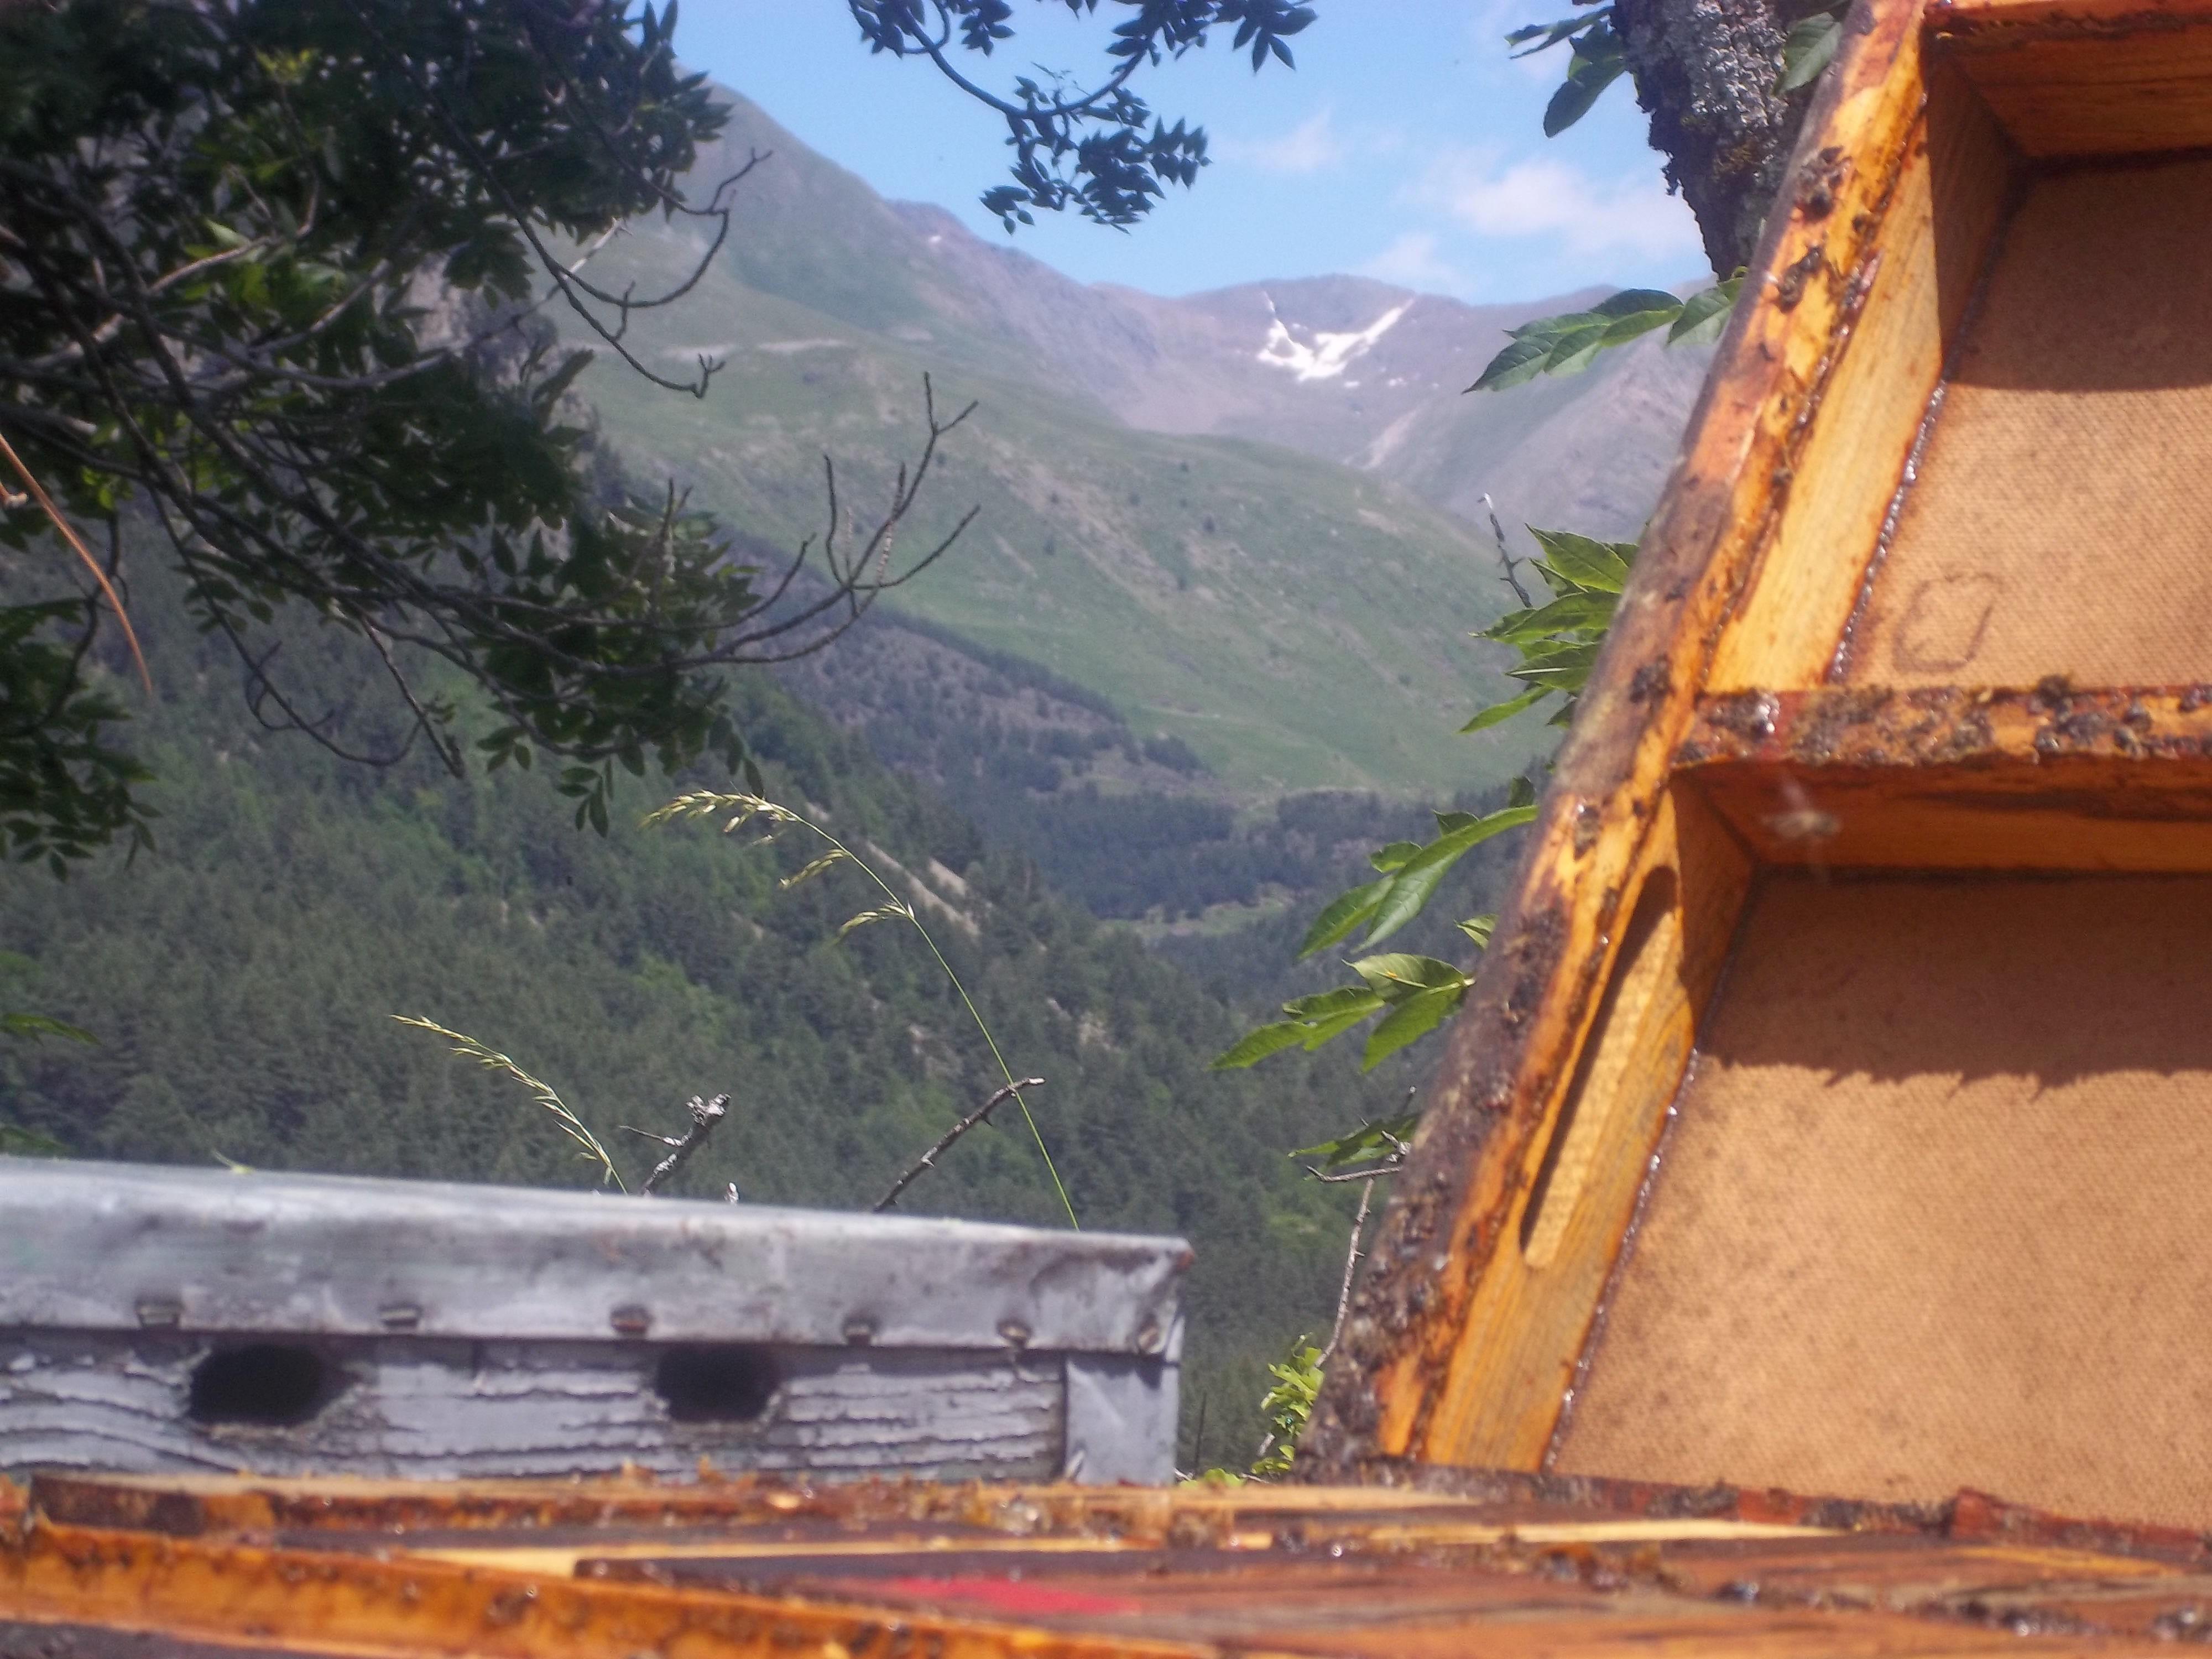 This is the beautiful view Rossend's bees have when they wake in the morning. This photo is from the Pyrenees